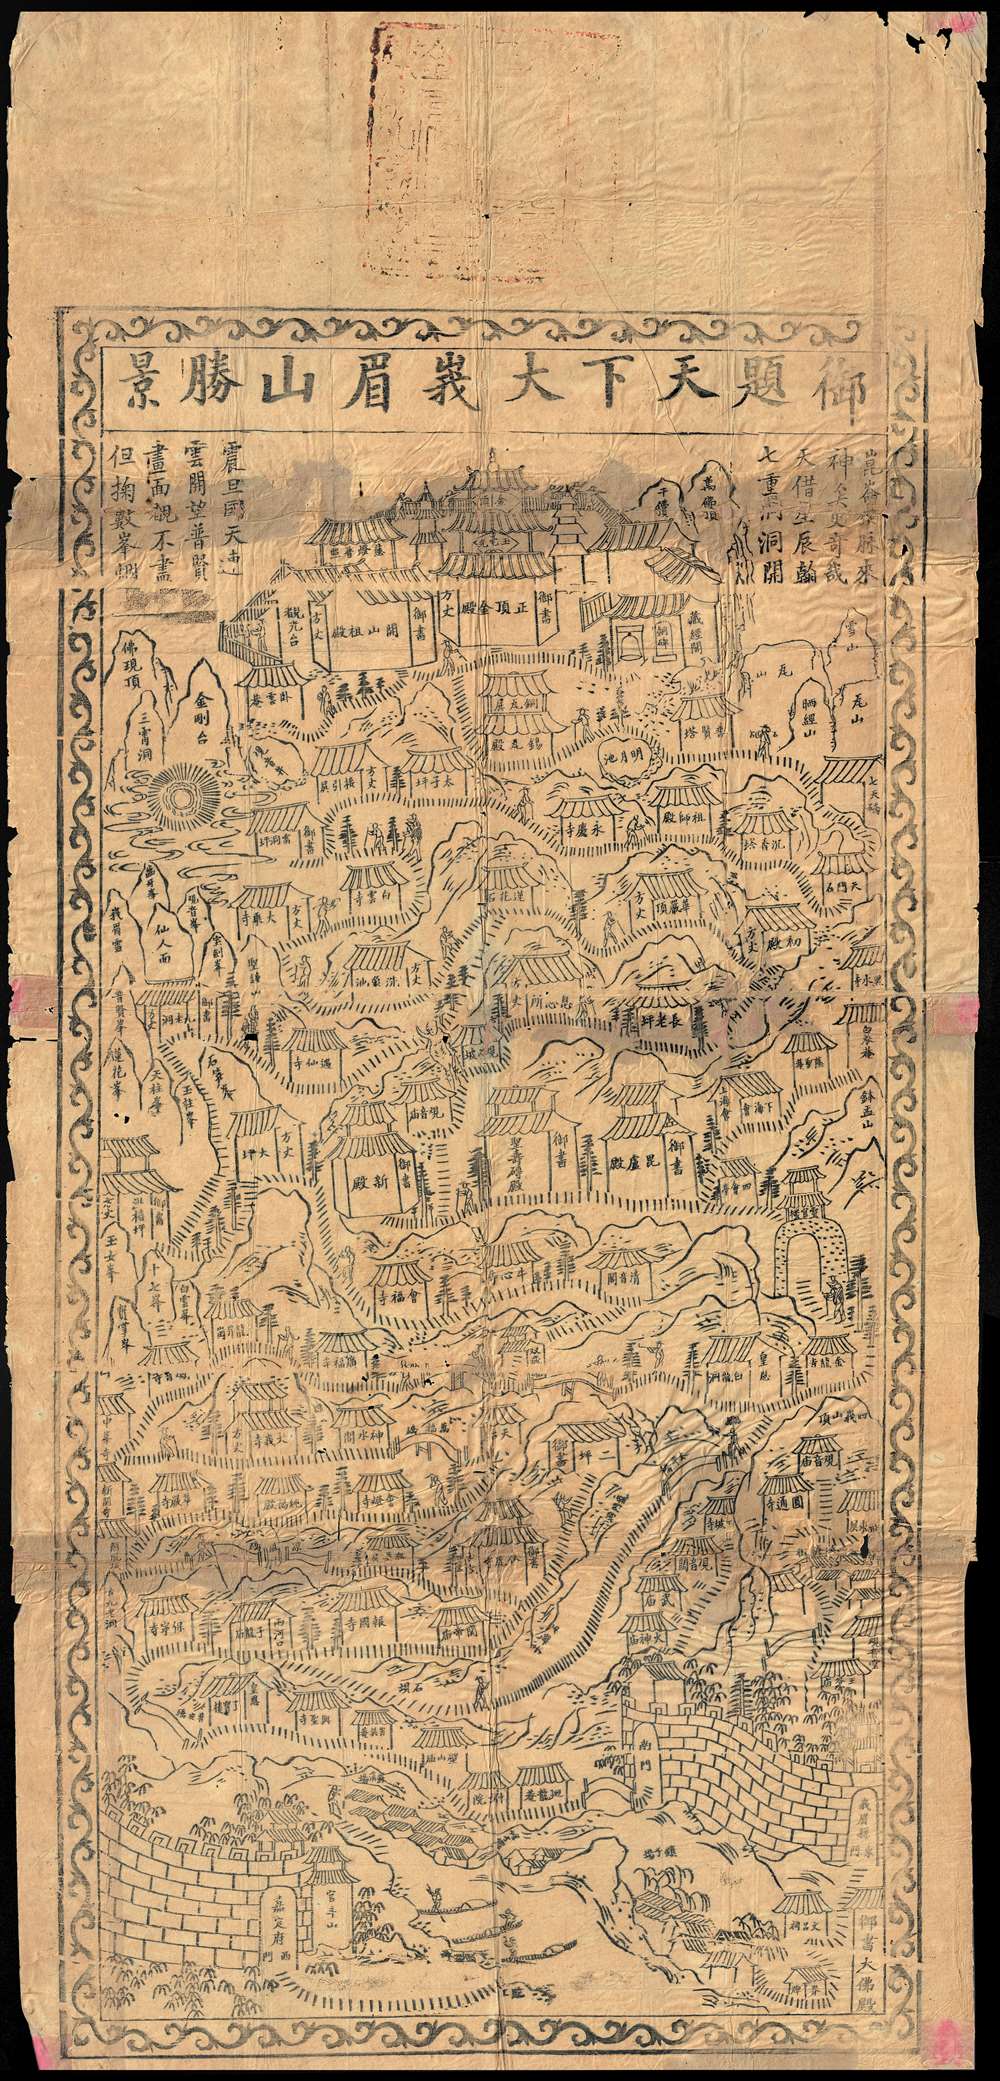 1700 Qing or Ming Dynasty Chinese Map of Mount Emeishan, Sichuan, China